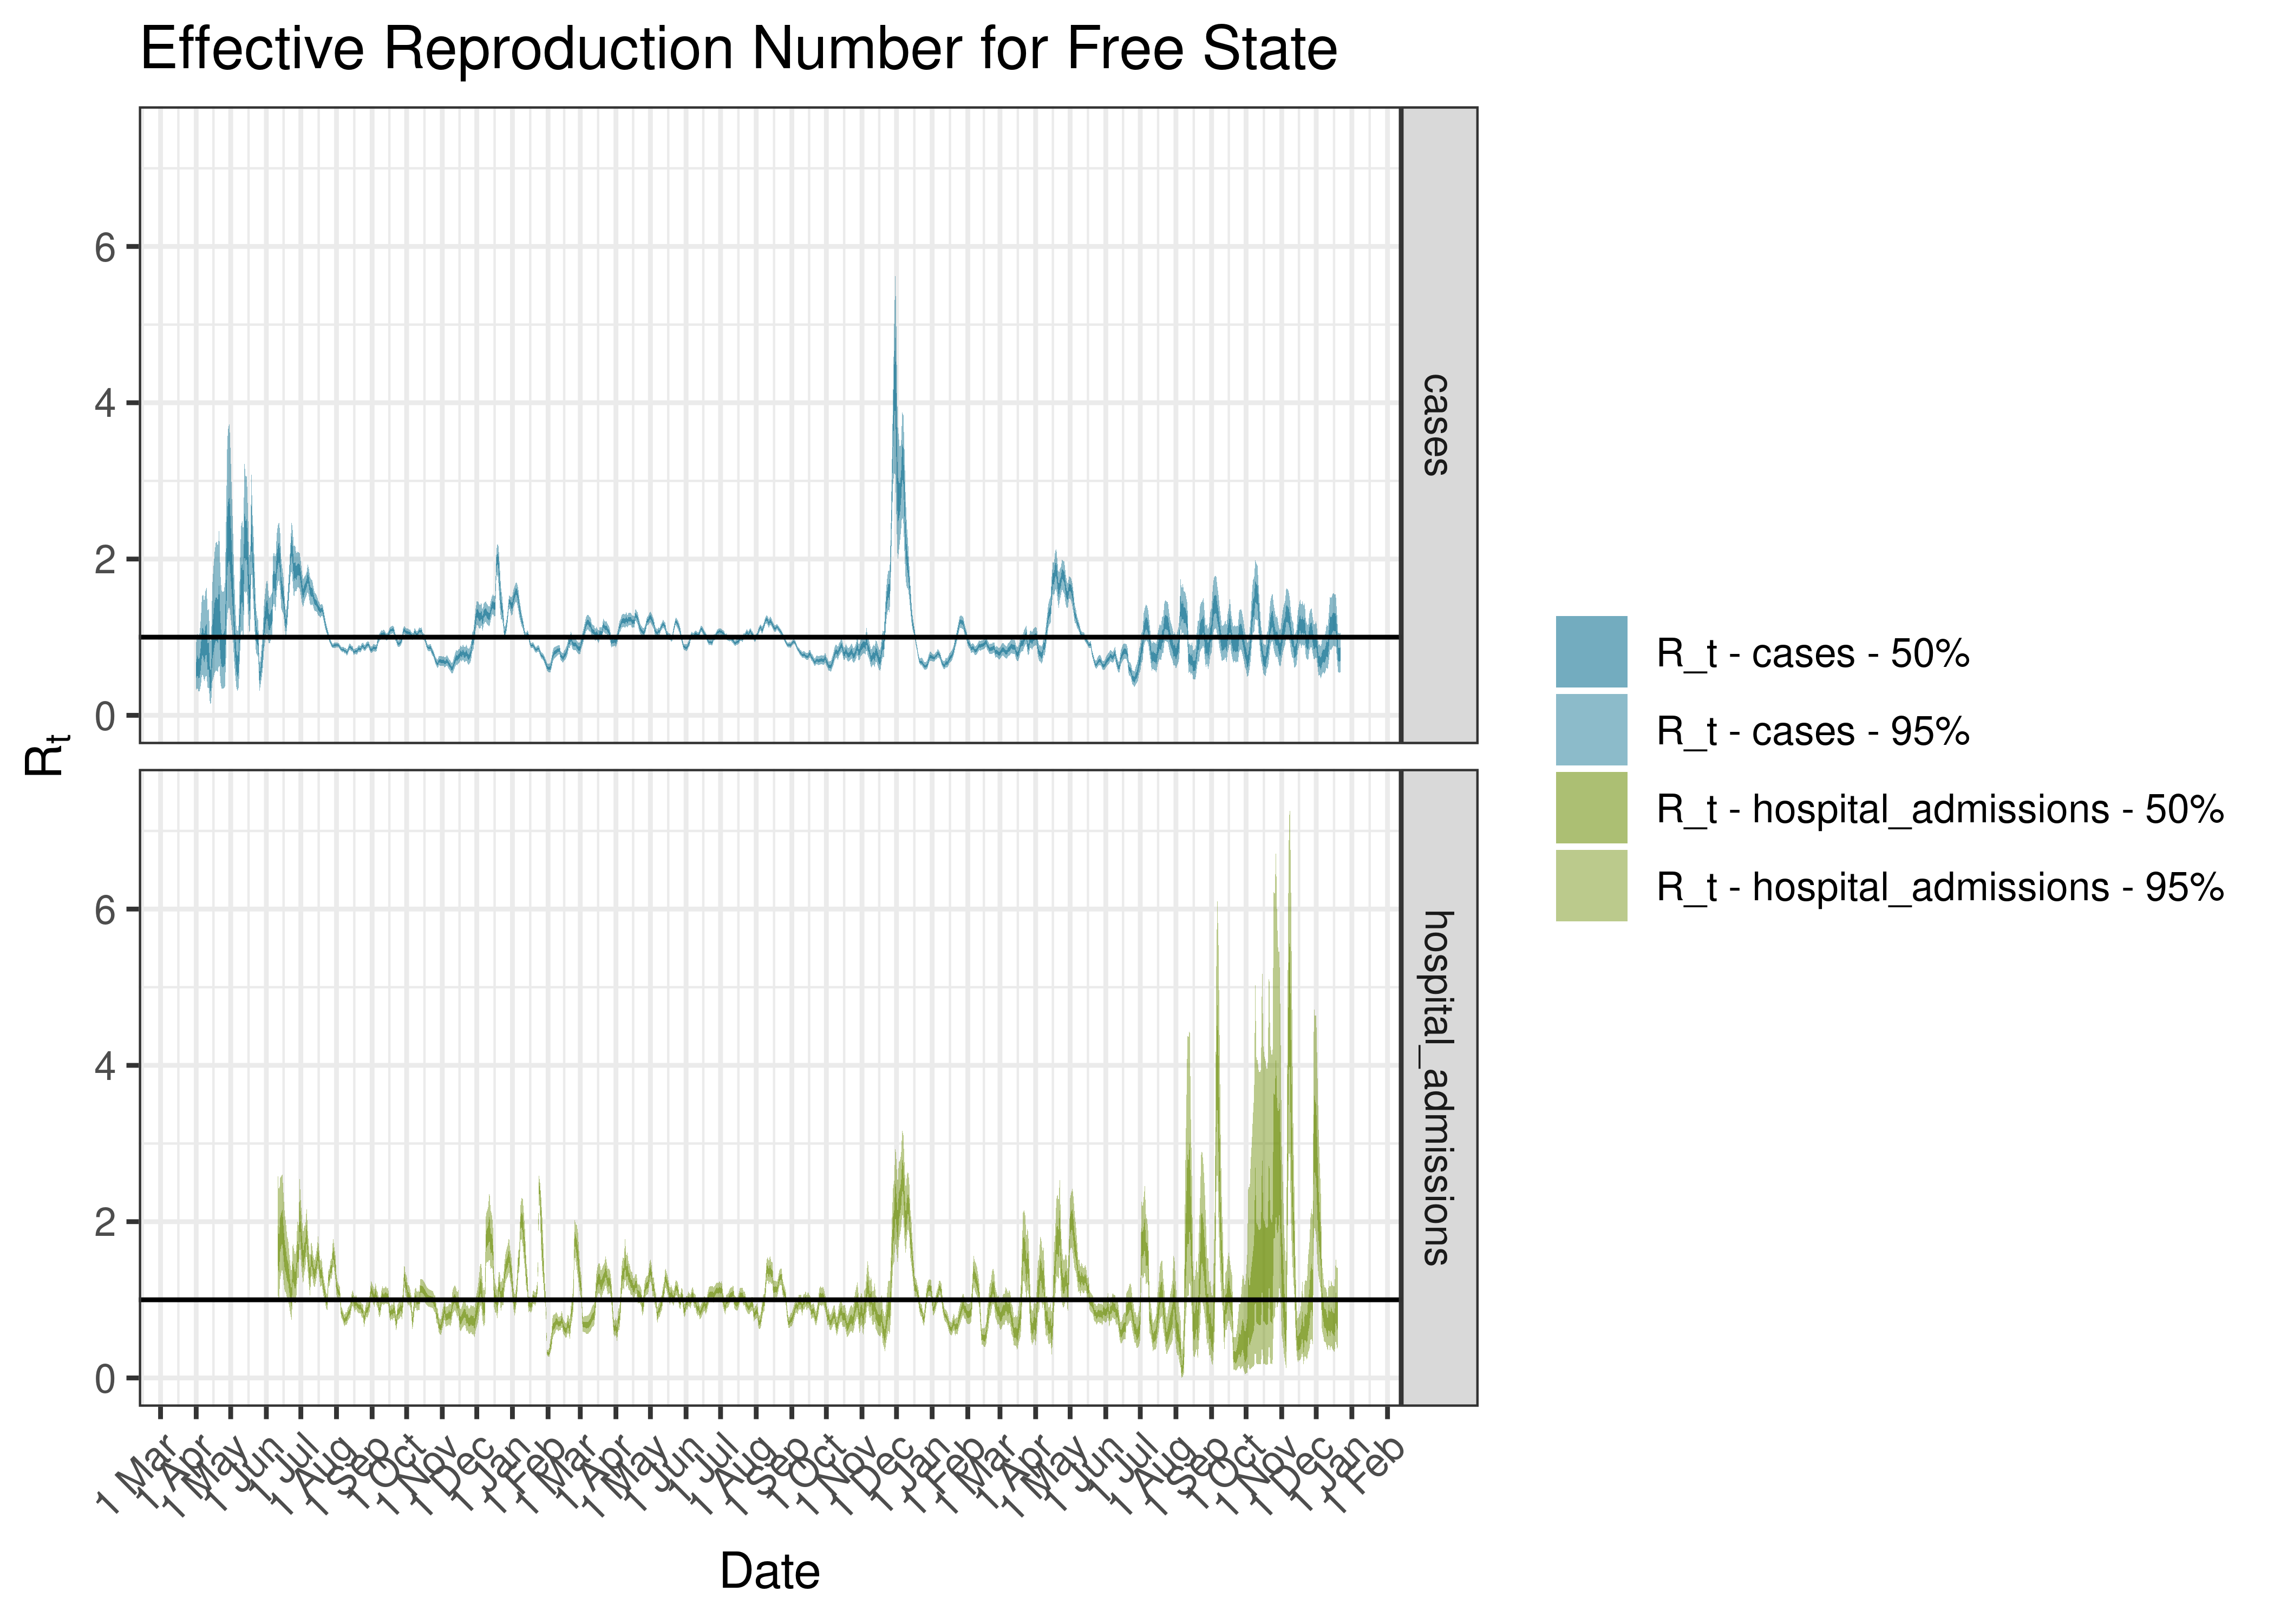 Estimated Effective Reproduction Number for Free State since 1 April 2020